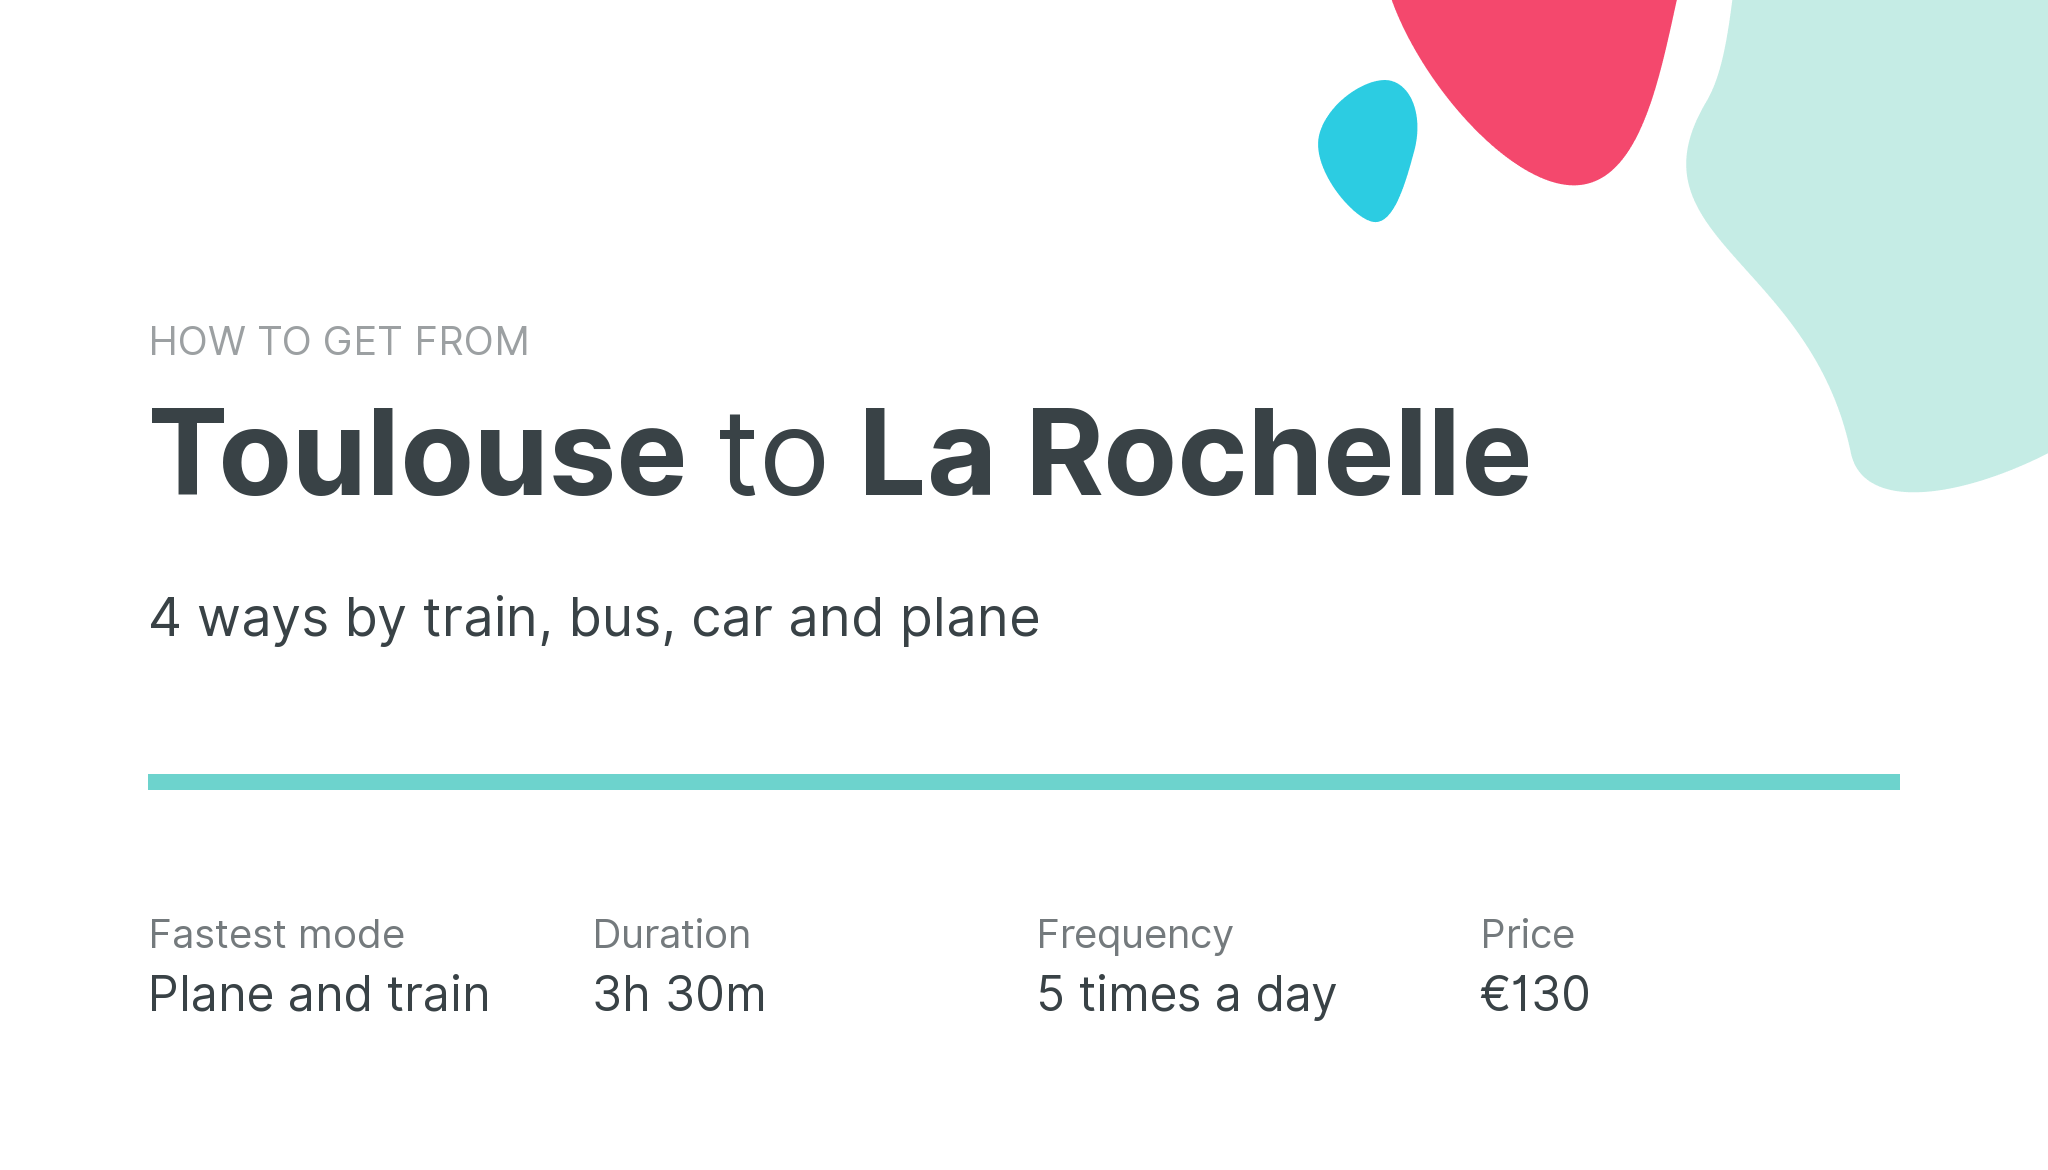 How do I get from Toulouse to La Rochelle